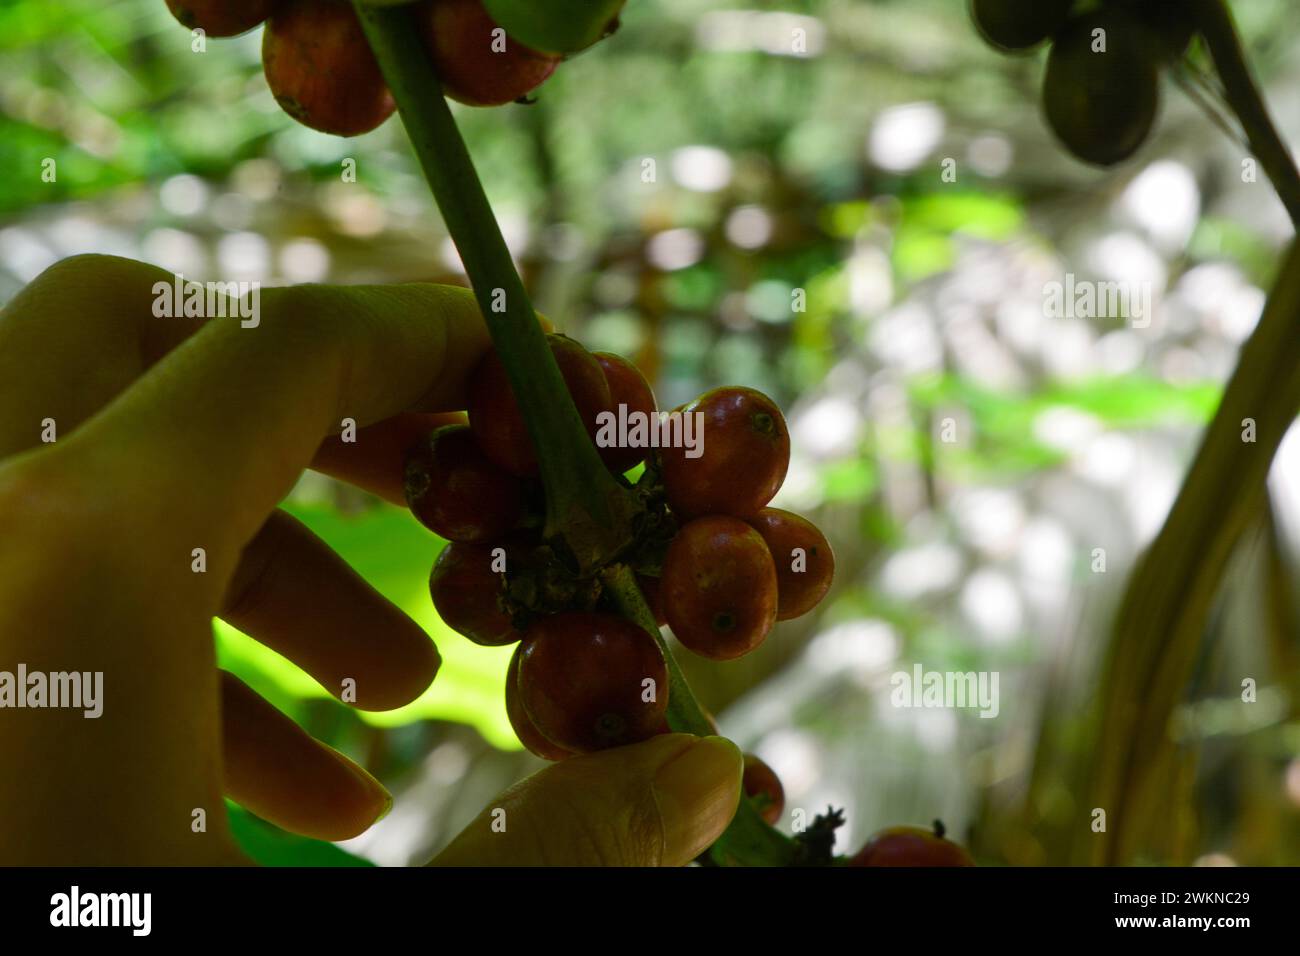 Coffee beans grown in tropical forests. Stock Photo